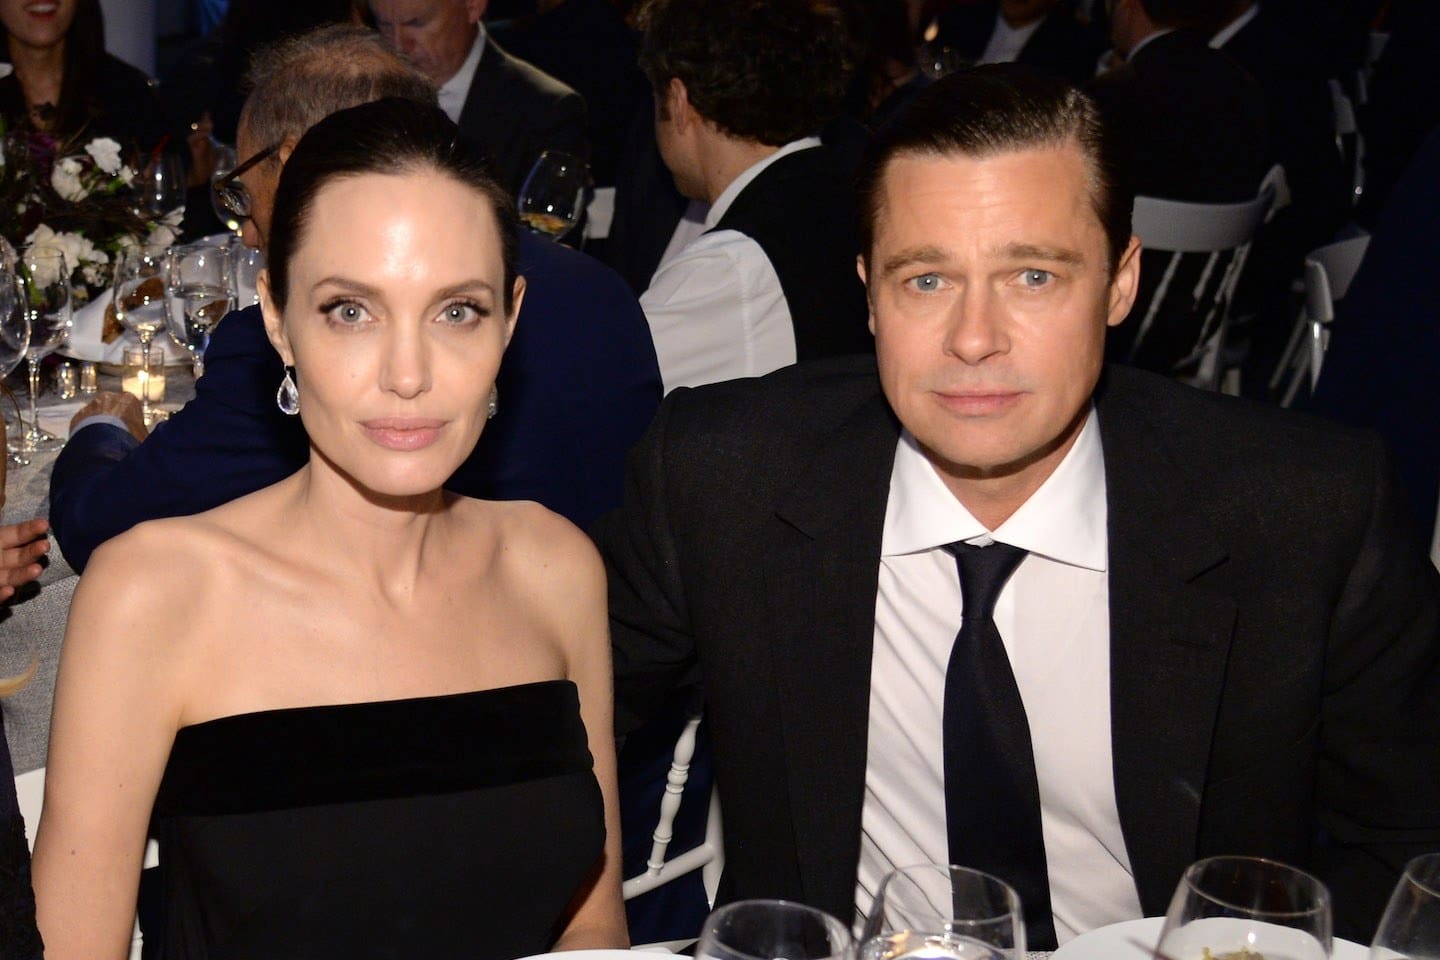 ”angelina-jolie-and-brad-pitts-miraval-winery-announces-the-release-of-a-new-wine-despite-their-bitter-divorce”